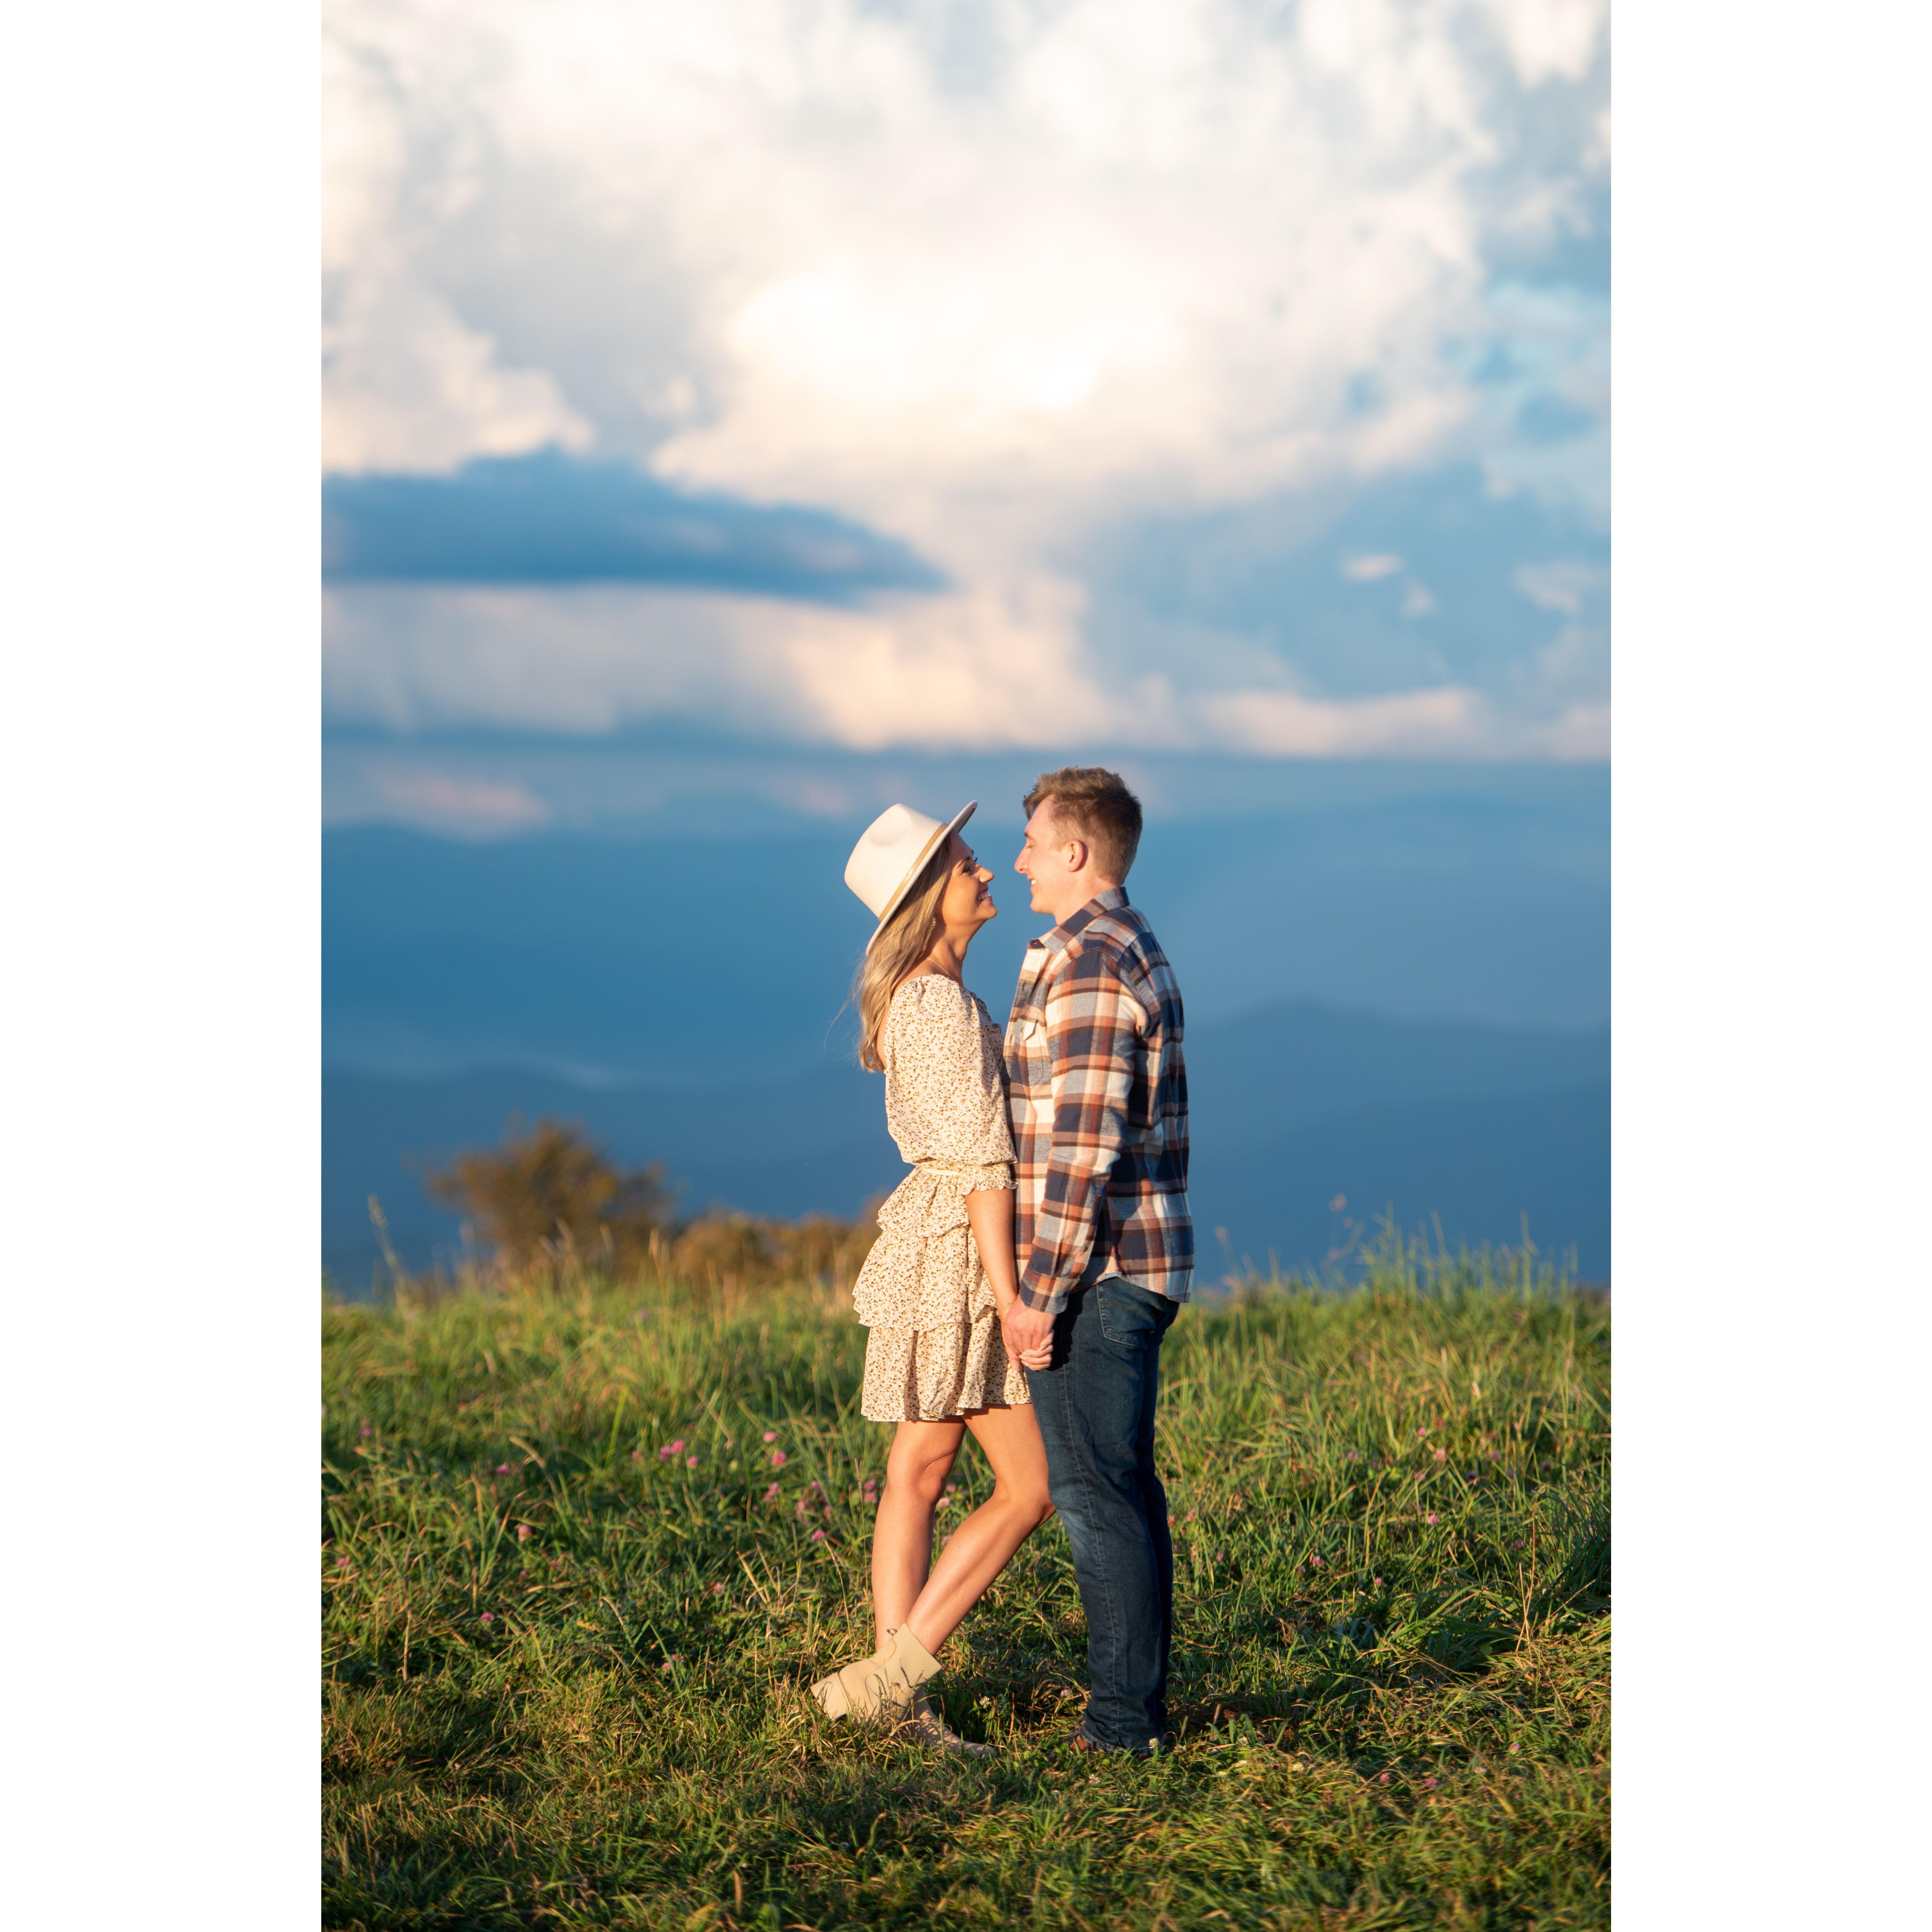 Engagement photoshoot in the Smoky Mountains